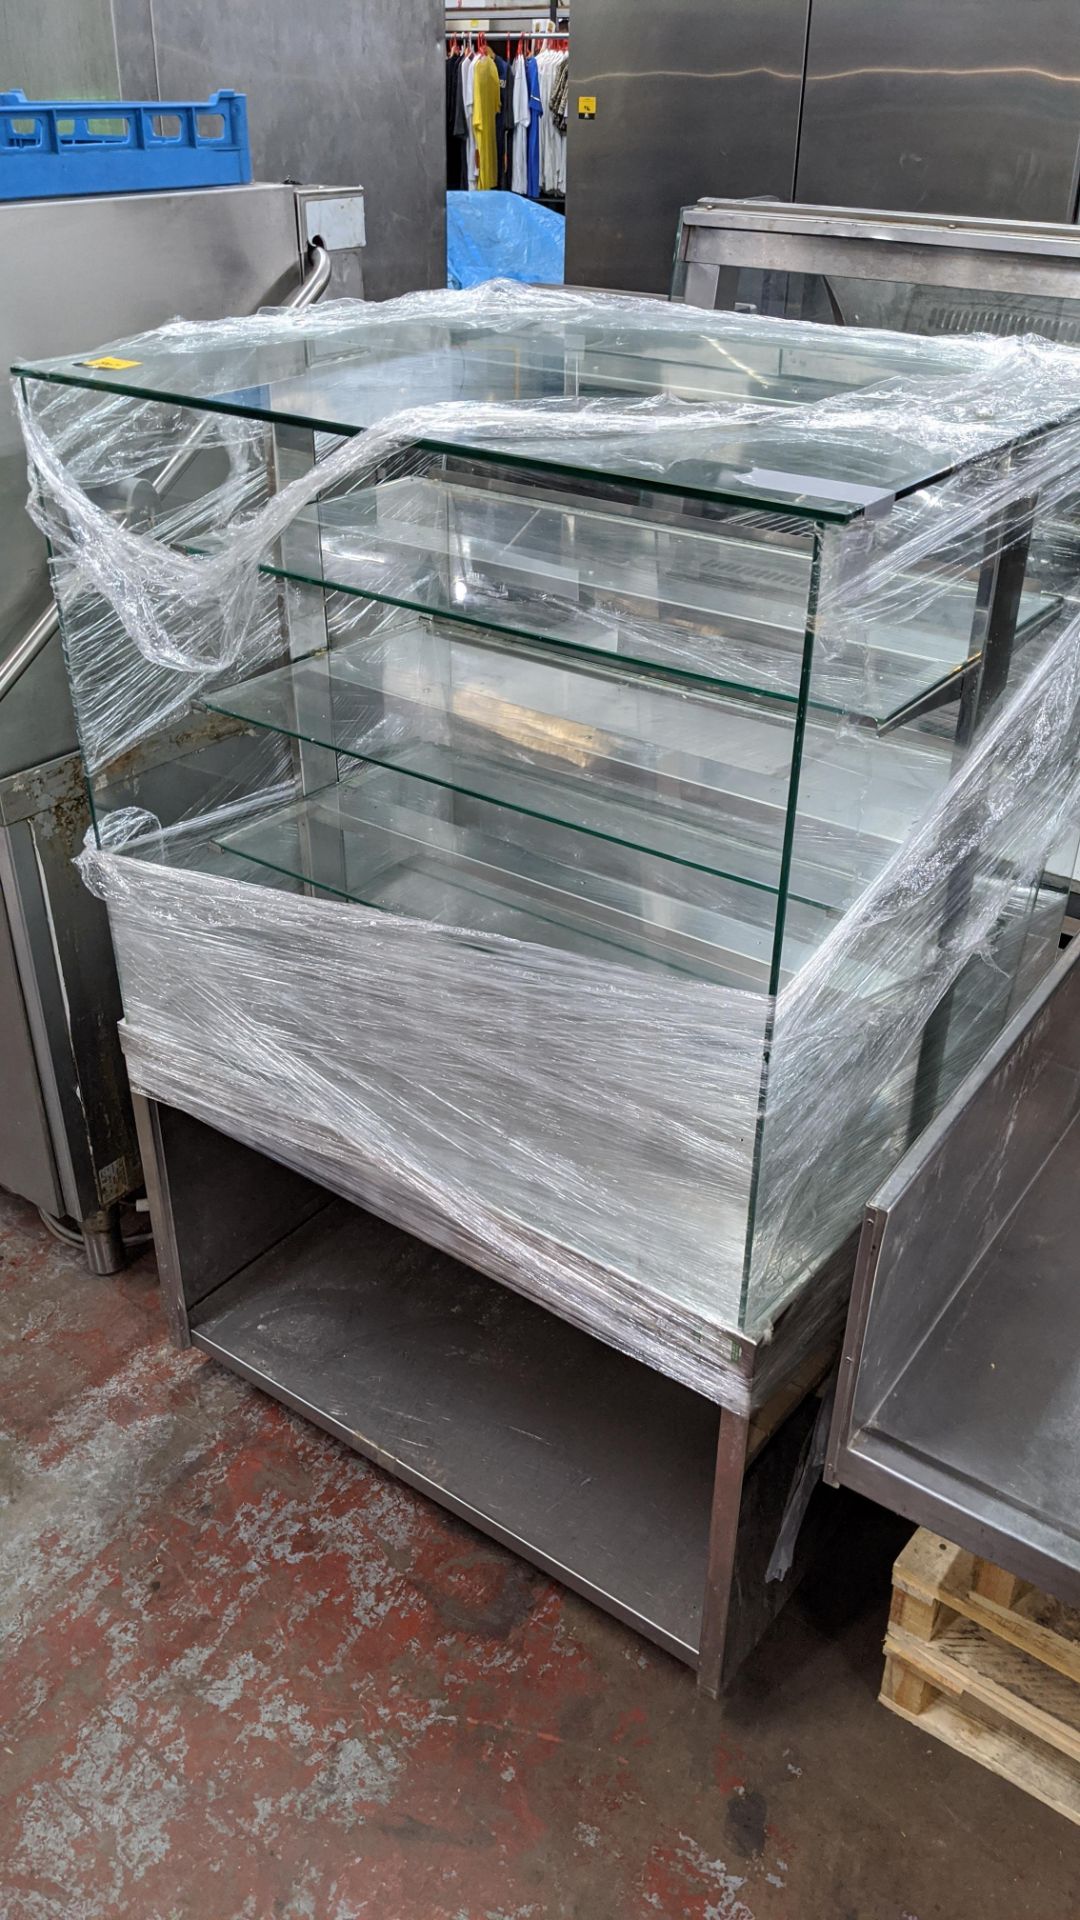 Stainless steel & glass display/serving unit, max external dimensions approximately 900mm x 670mm - Image 2 of 5